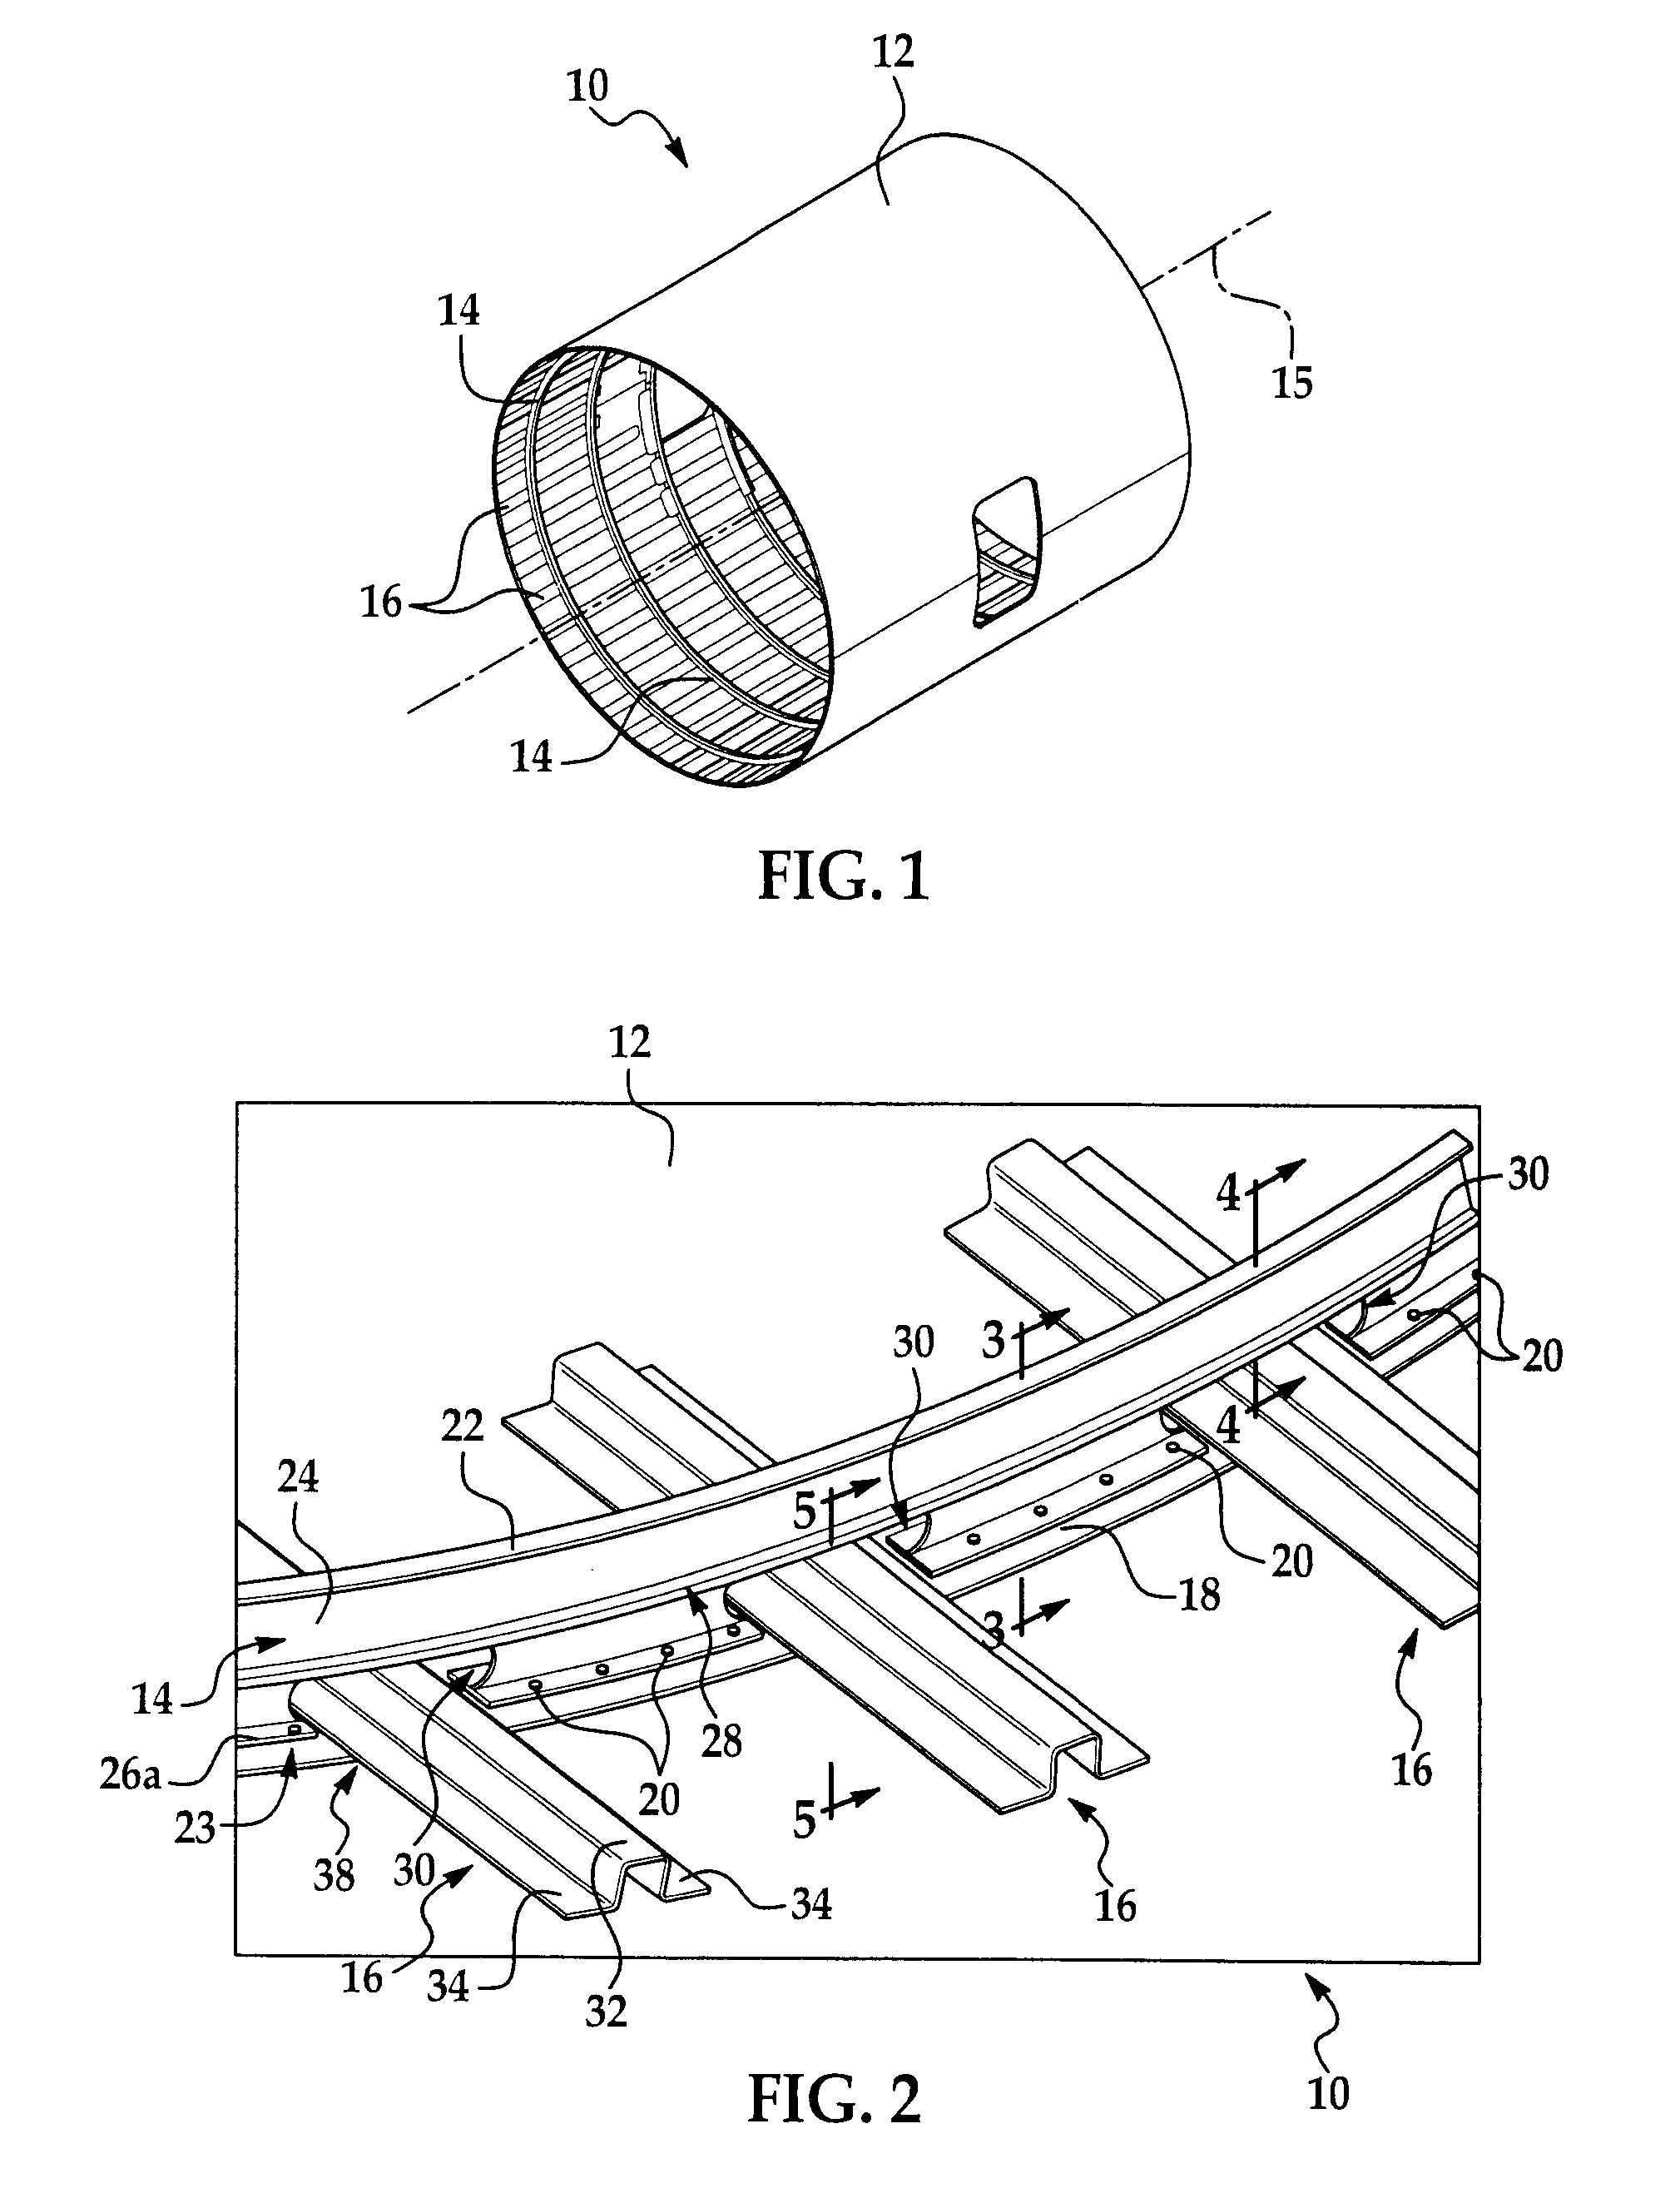 Bonded metal fuselage and method for making the same